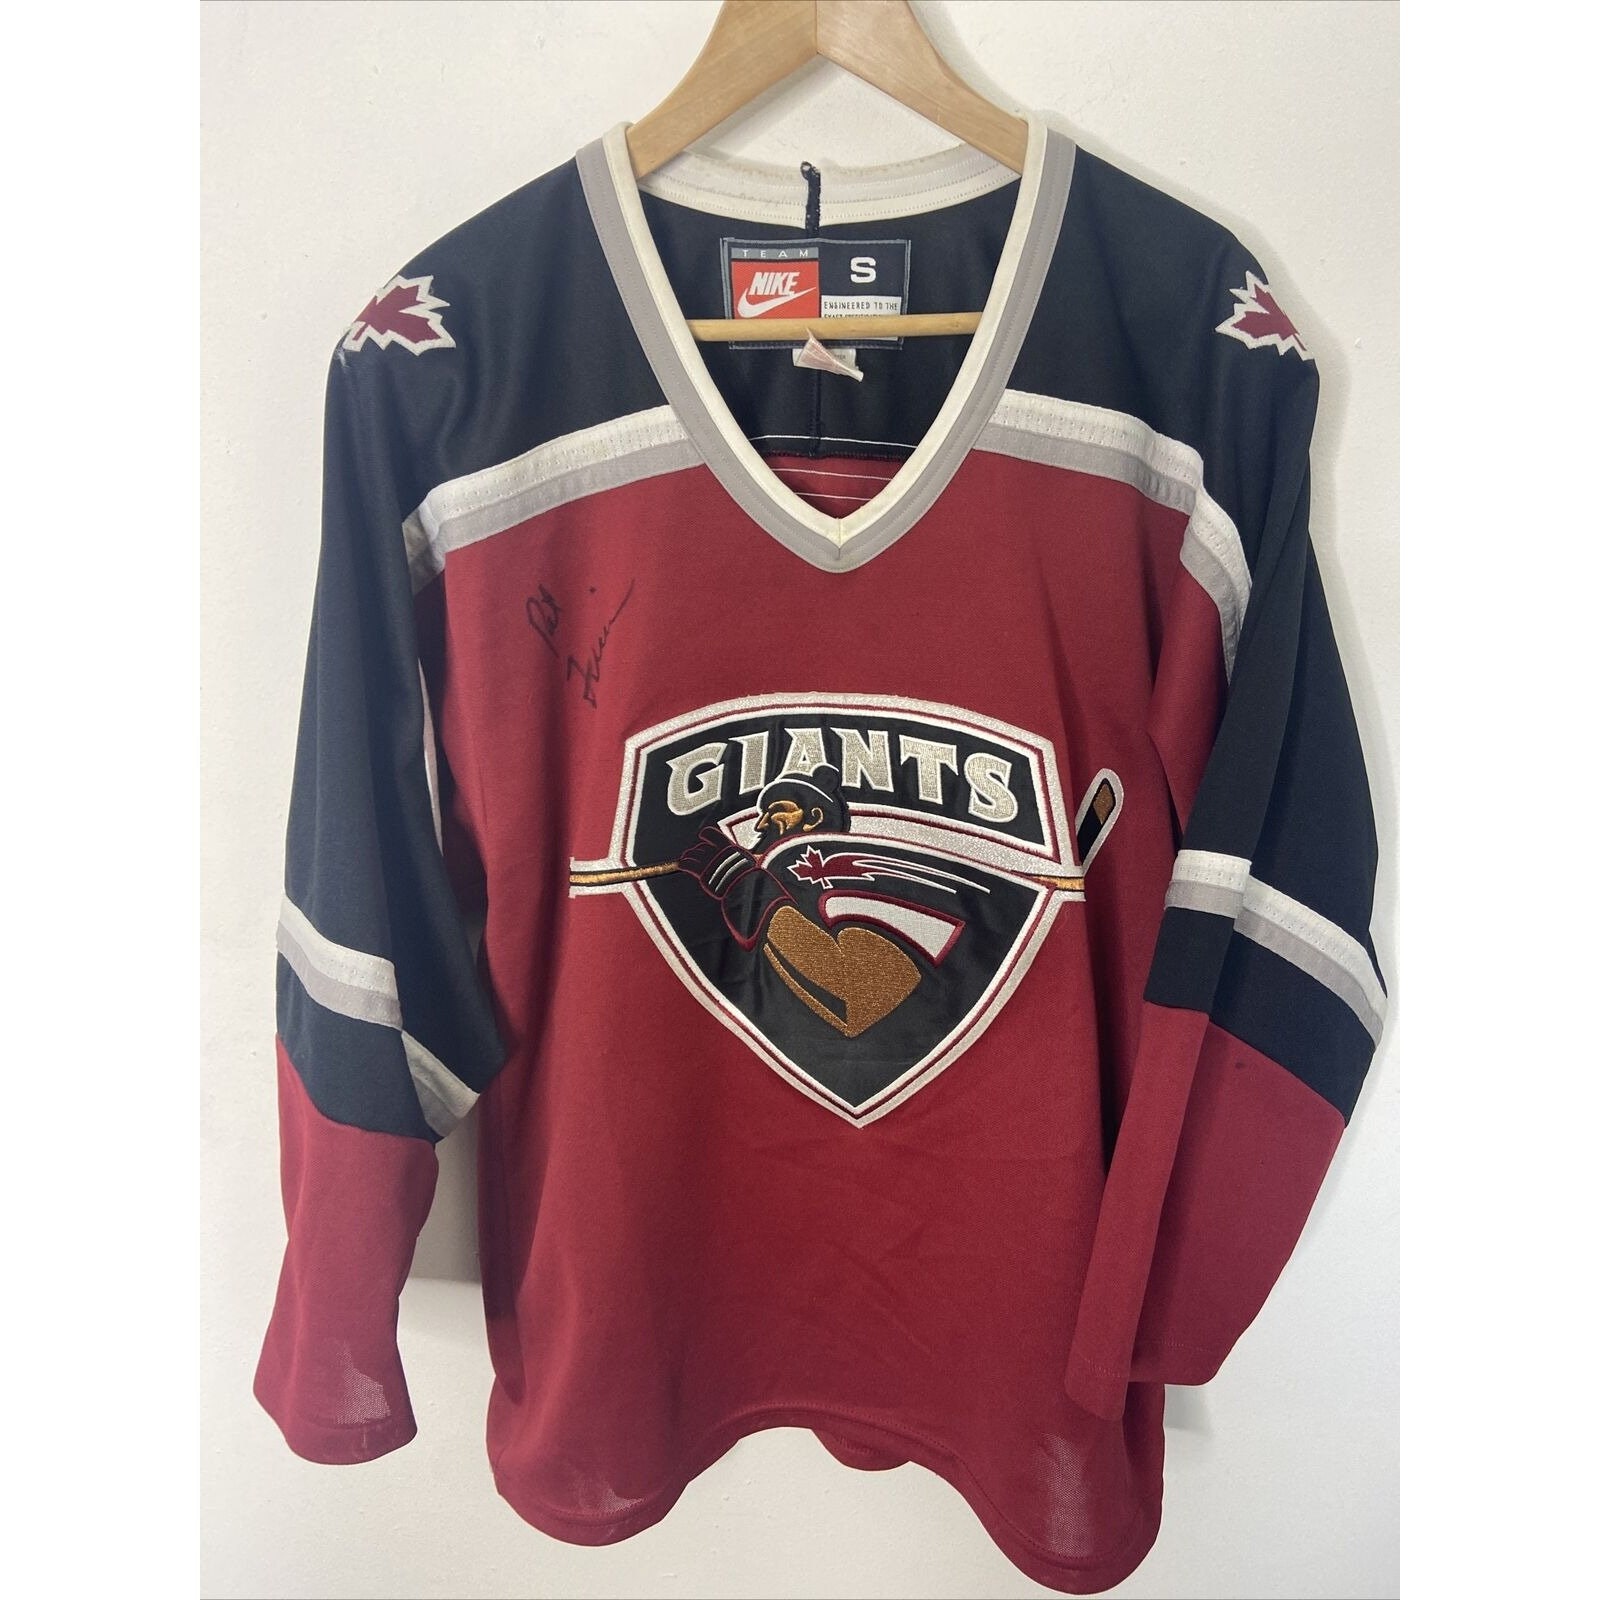 Calgary Flames Jersey Signed 2002. What is the value? : r/hockeyjerseys